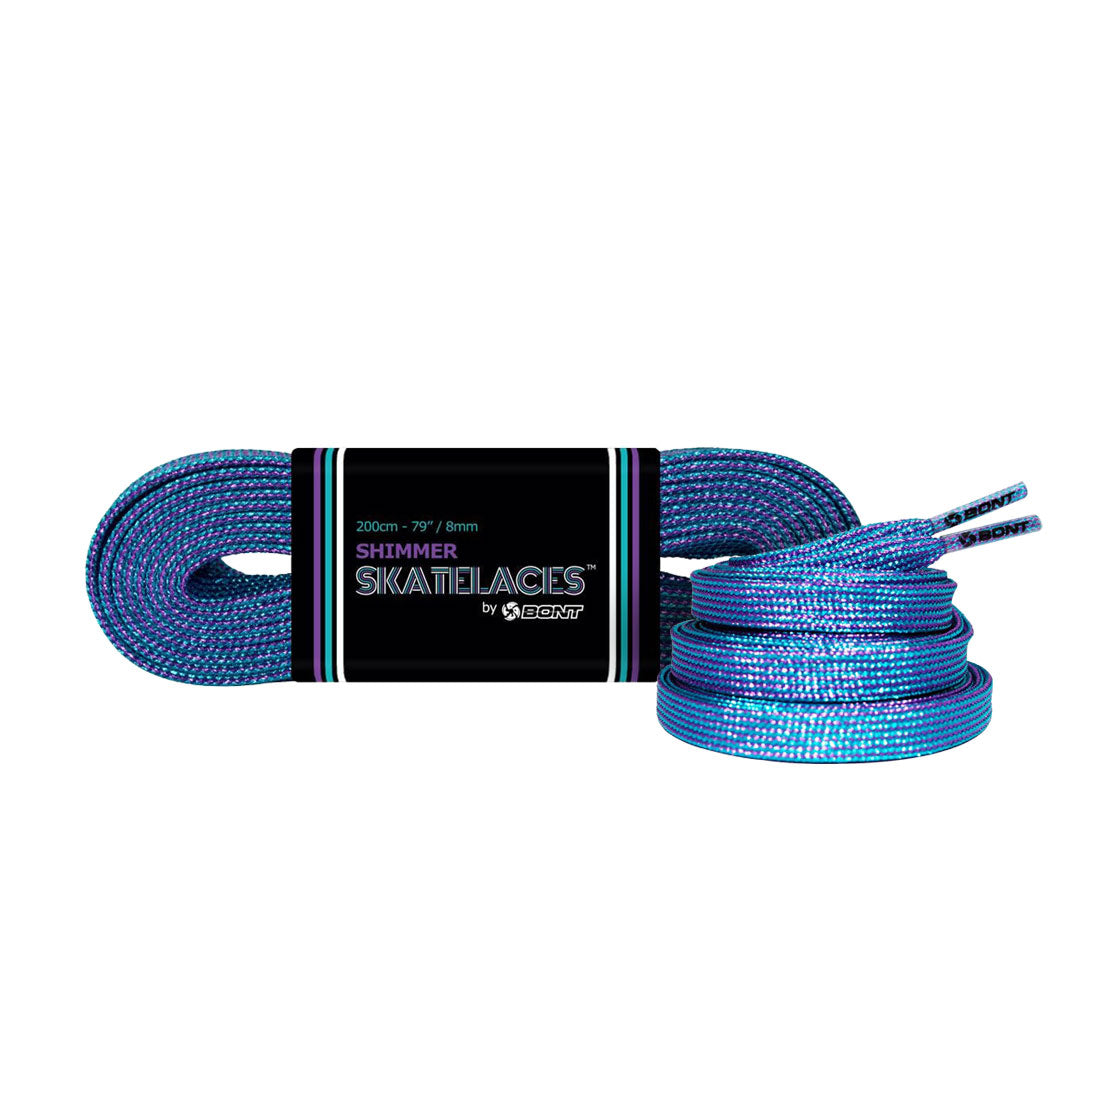 Bont Shimmer 8mm Laces - 245cm/96in Mermaid Dream Laces